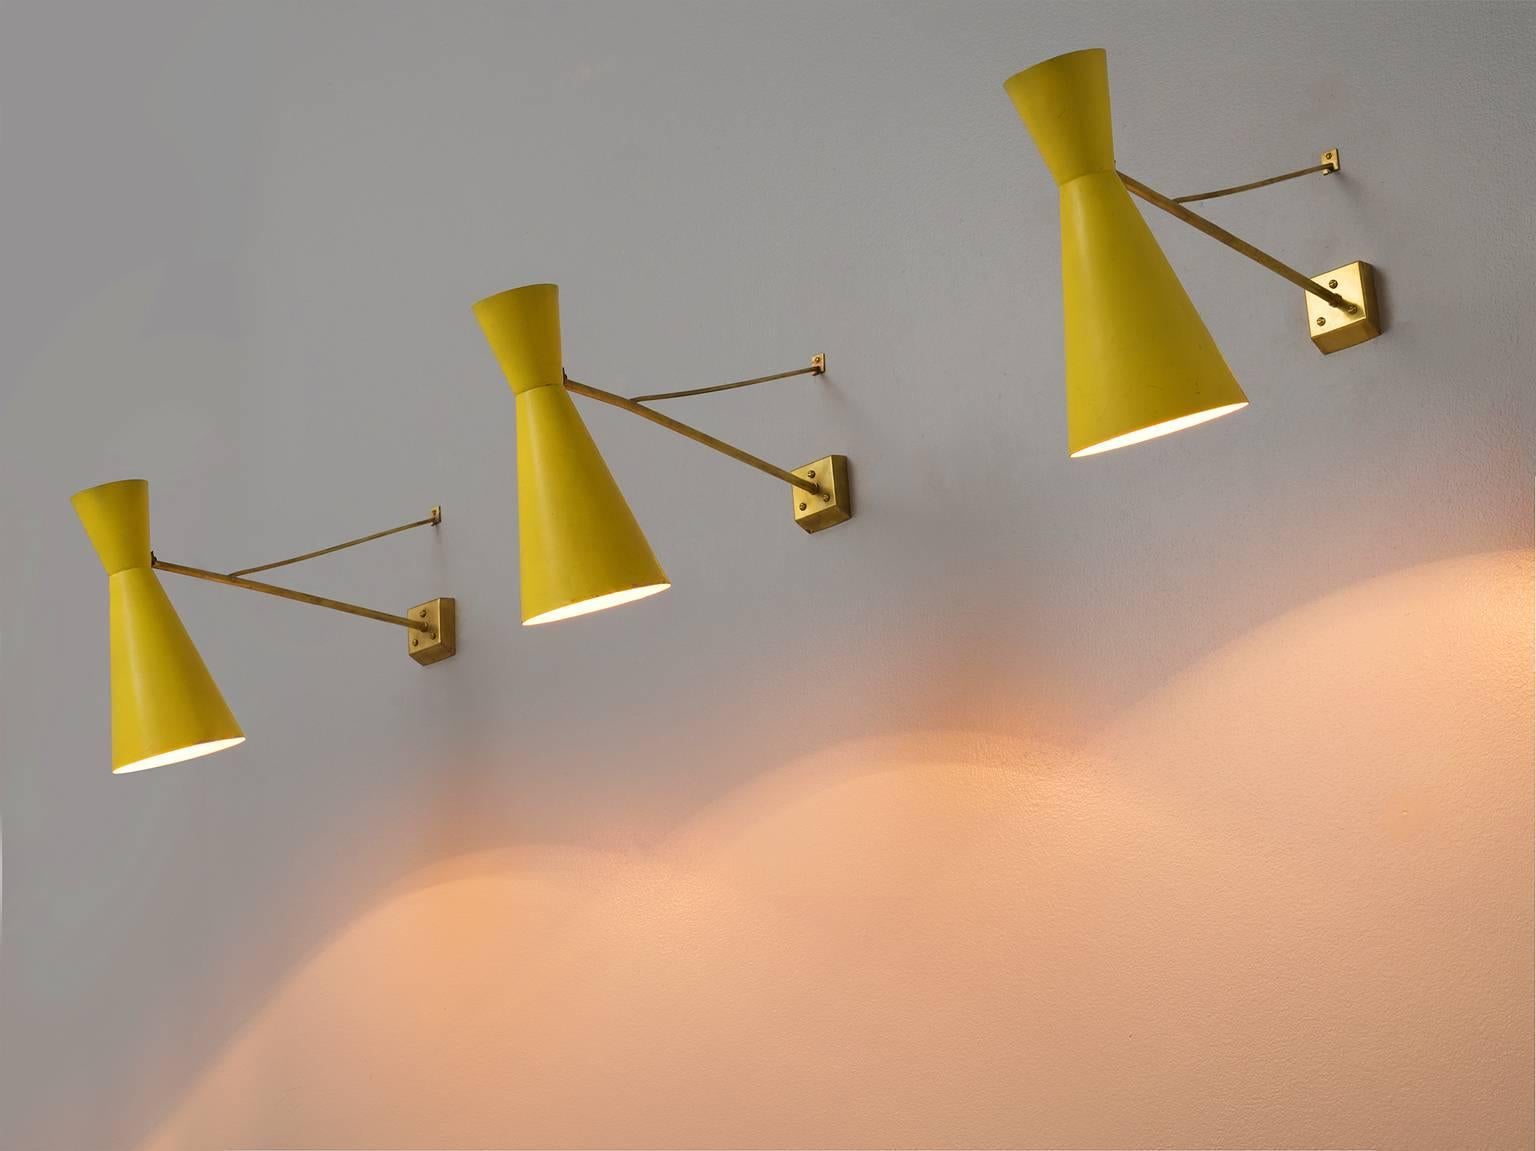 Set of five yellow wall lights, brass, Italy, 1960s. 

These lights have a very airy and playful appearance because of their thin brass rods. The soft and lemon-like yellow is a wonderful combination with the brass. They have an Industrial and